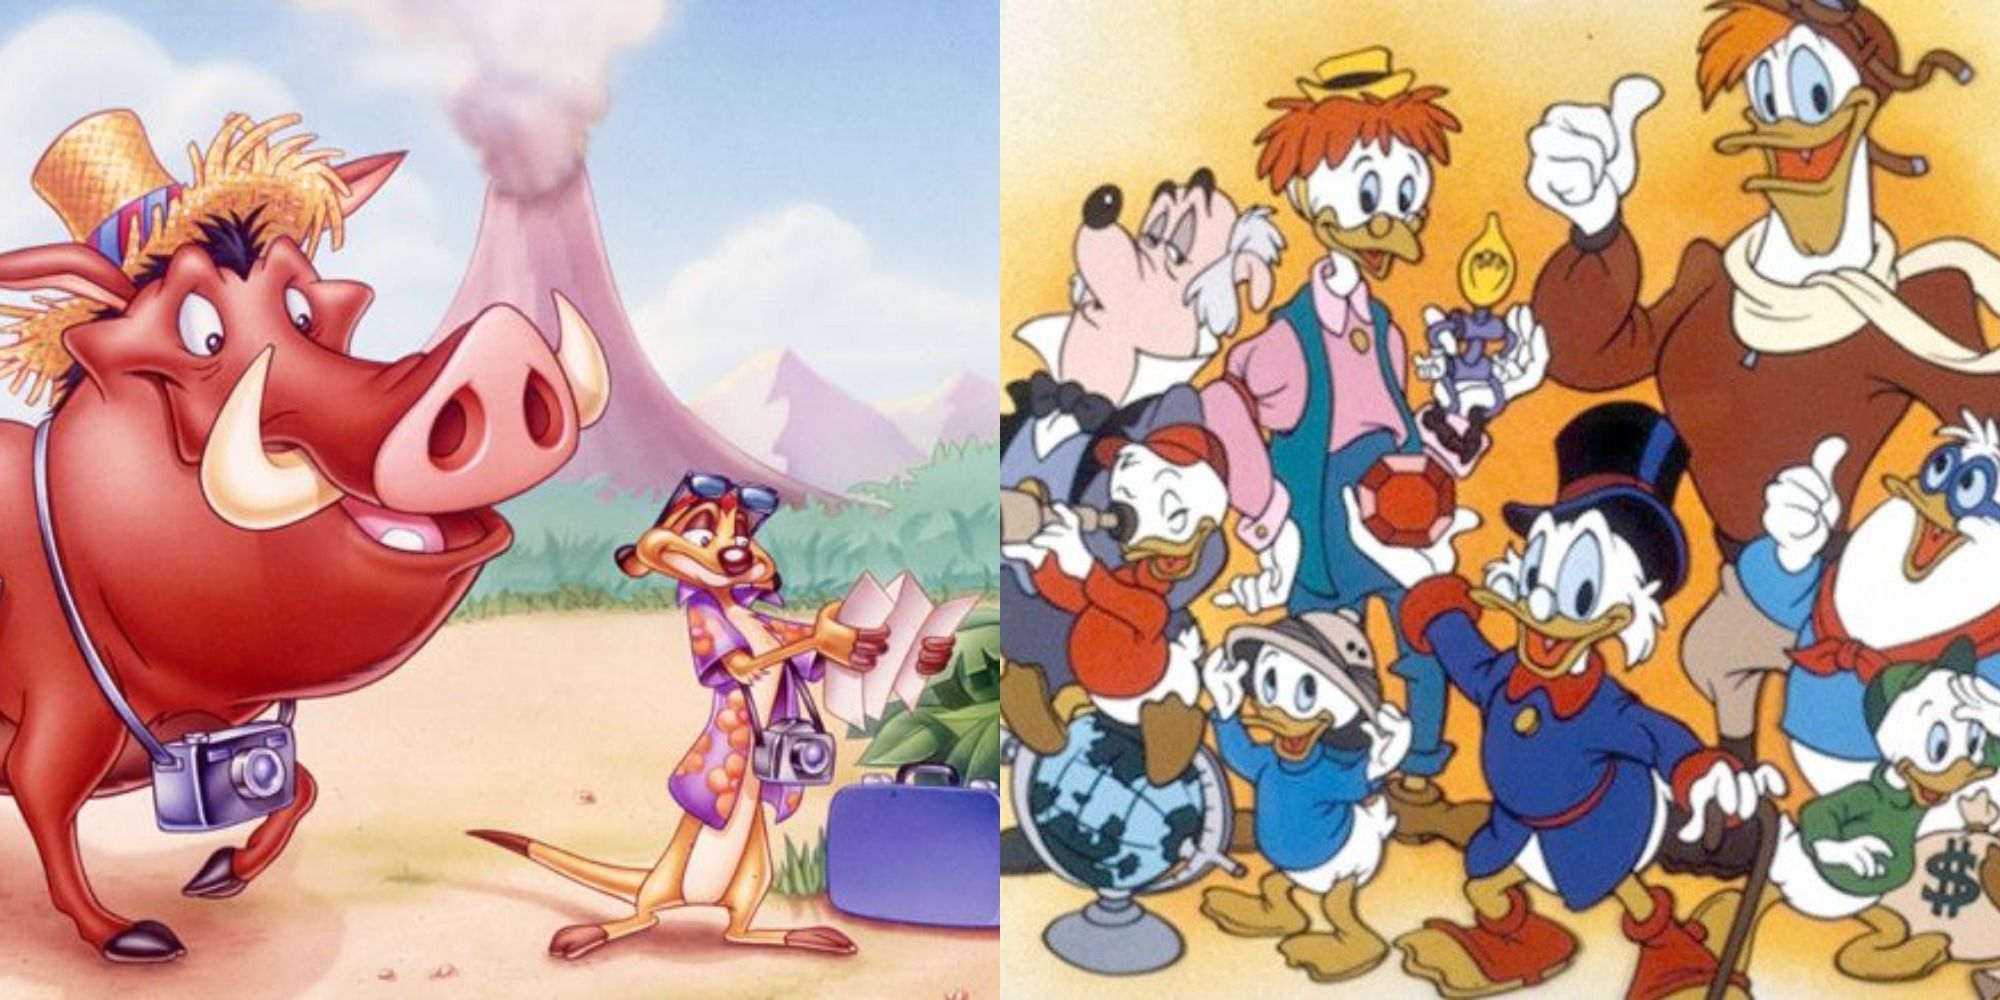 Split image of Timon and Pumbaa and the characters of Ducktales